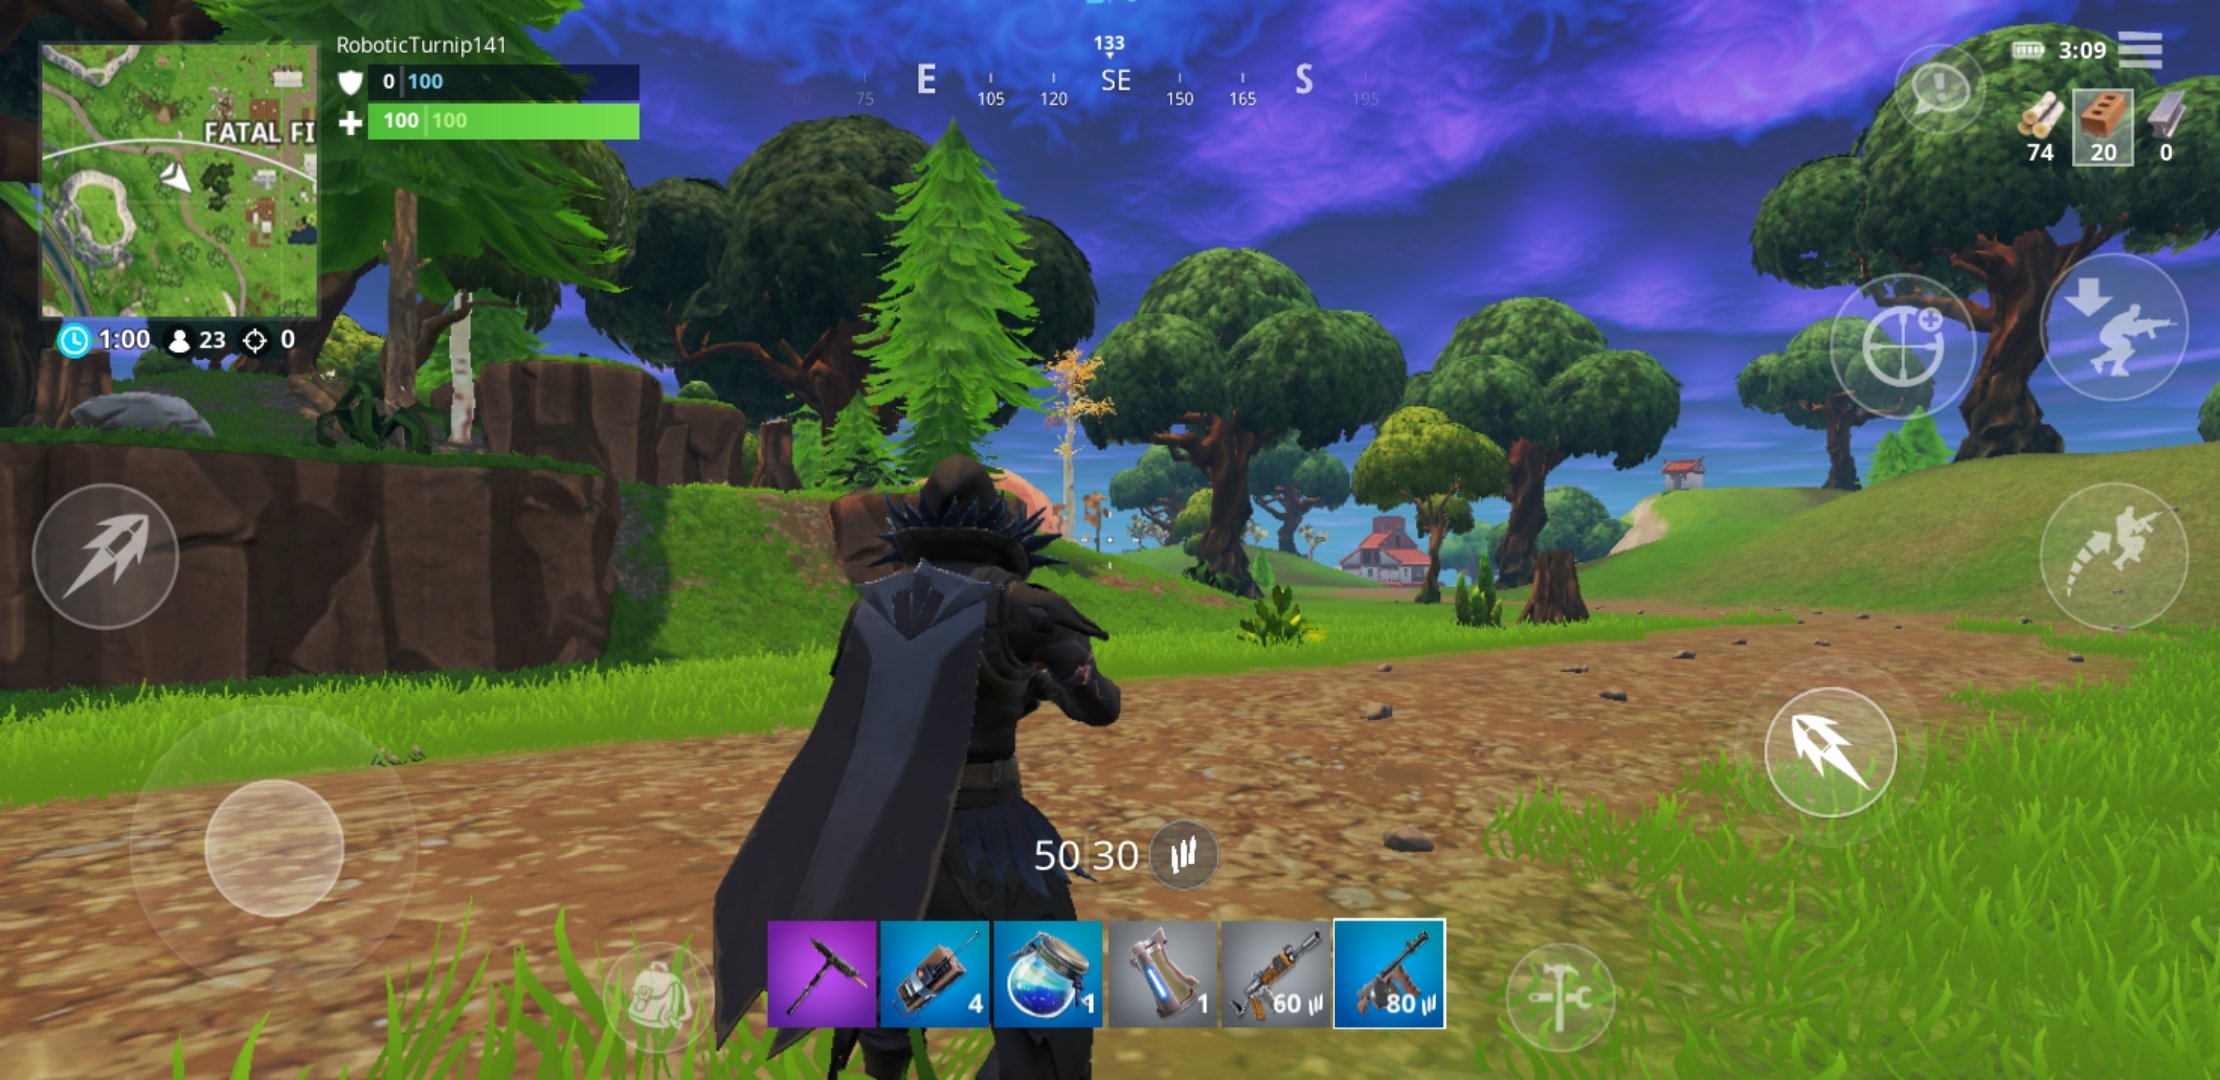 how to download fortnite hacks on pc